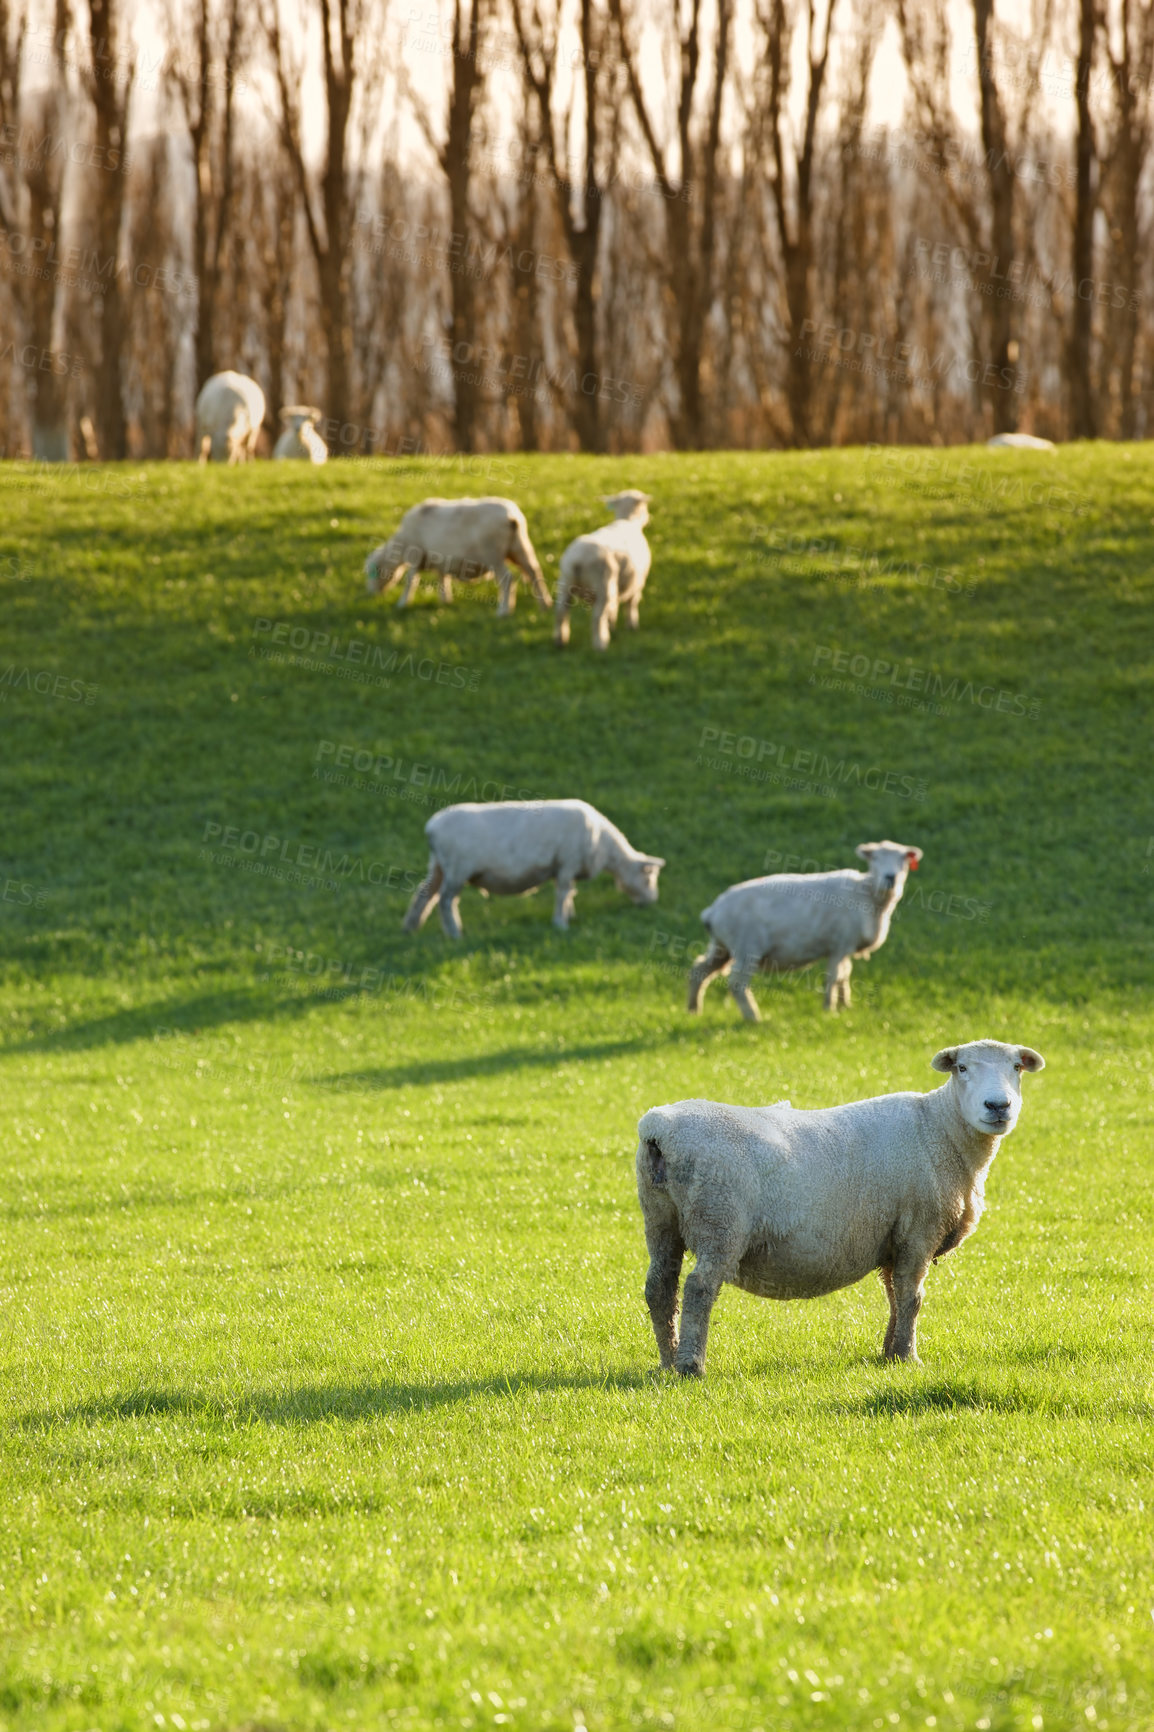 Buy stock photo A photo of sheep on a field in New Zealand